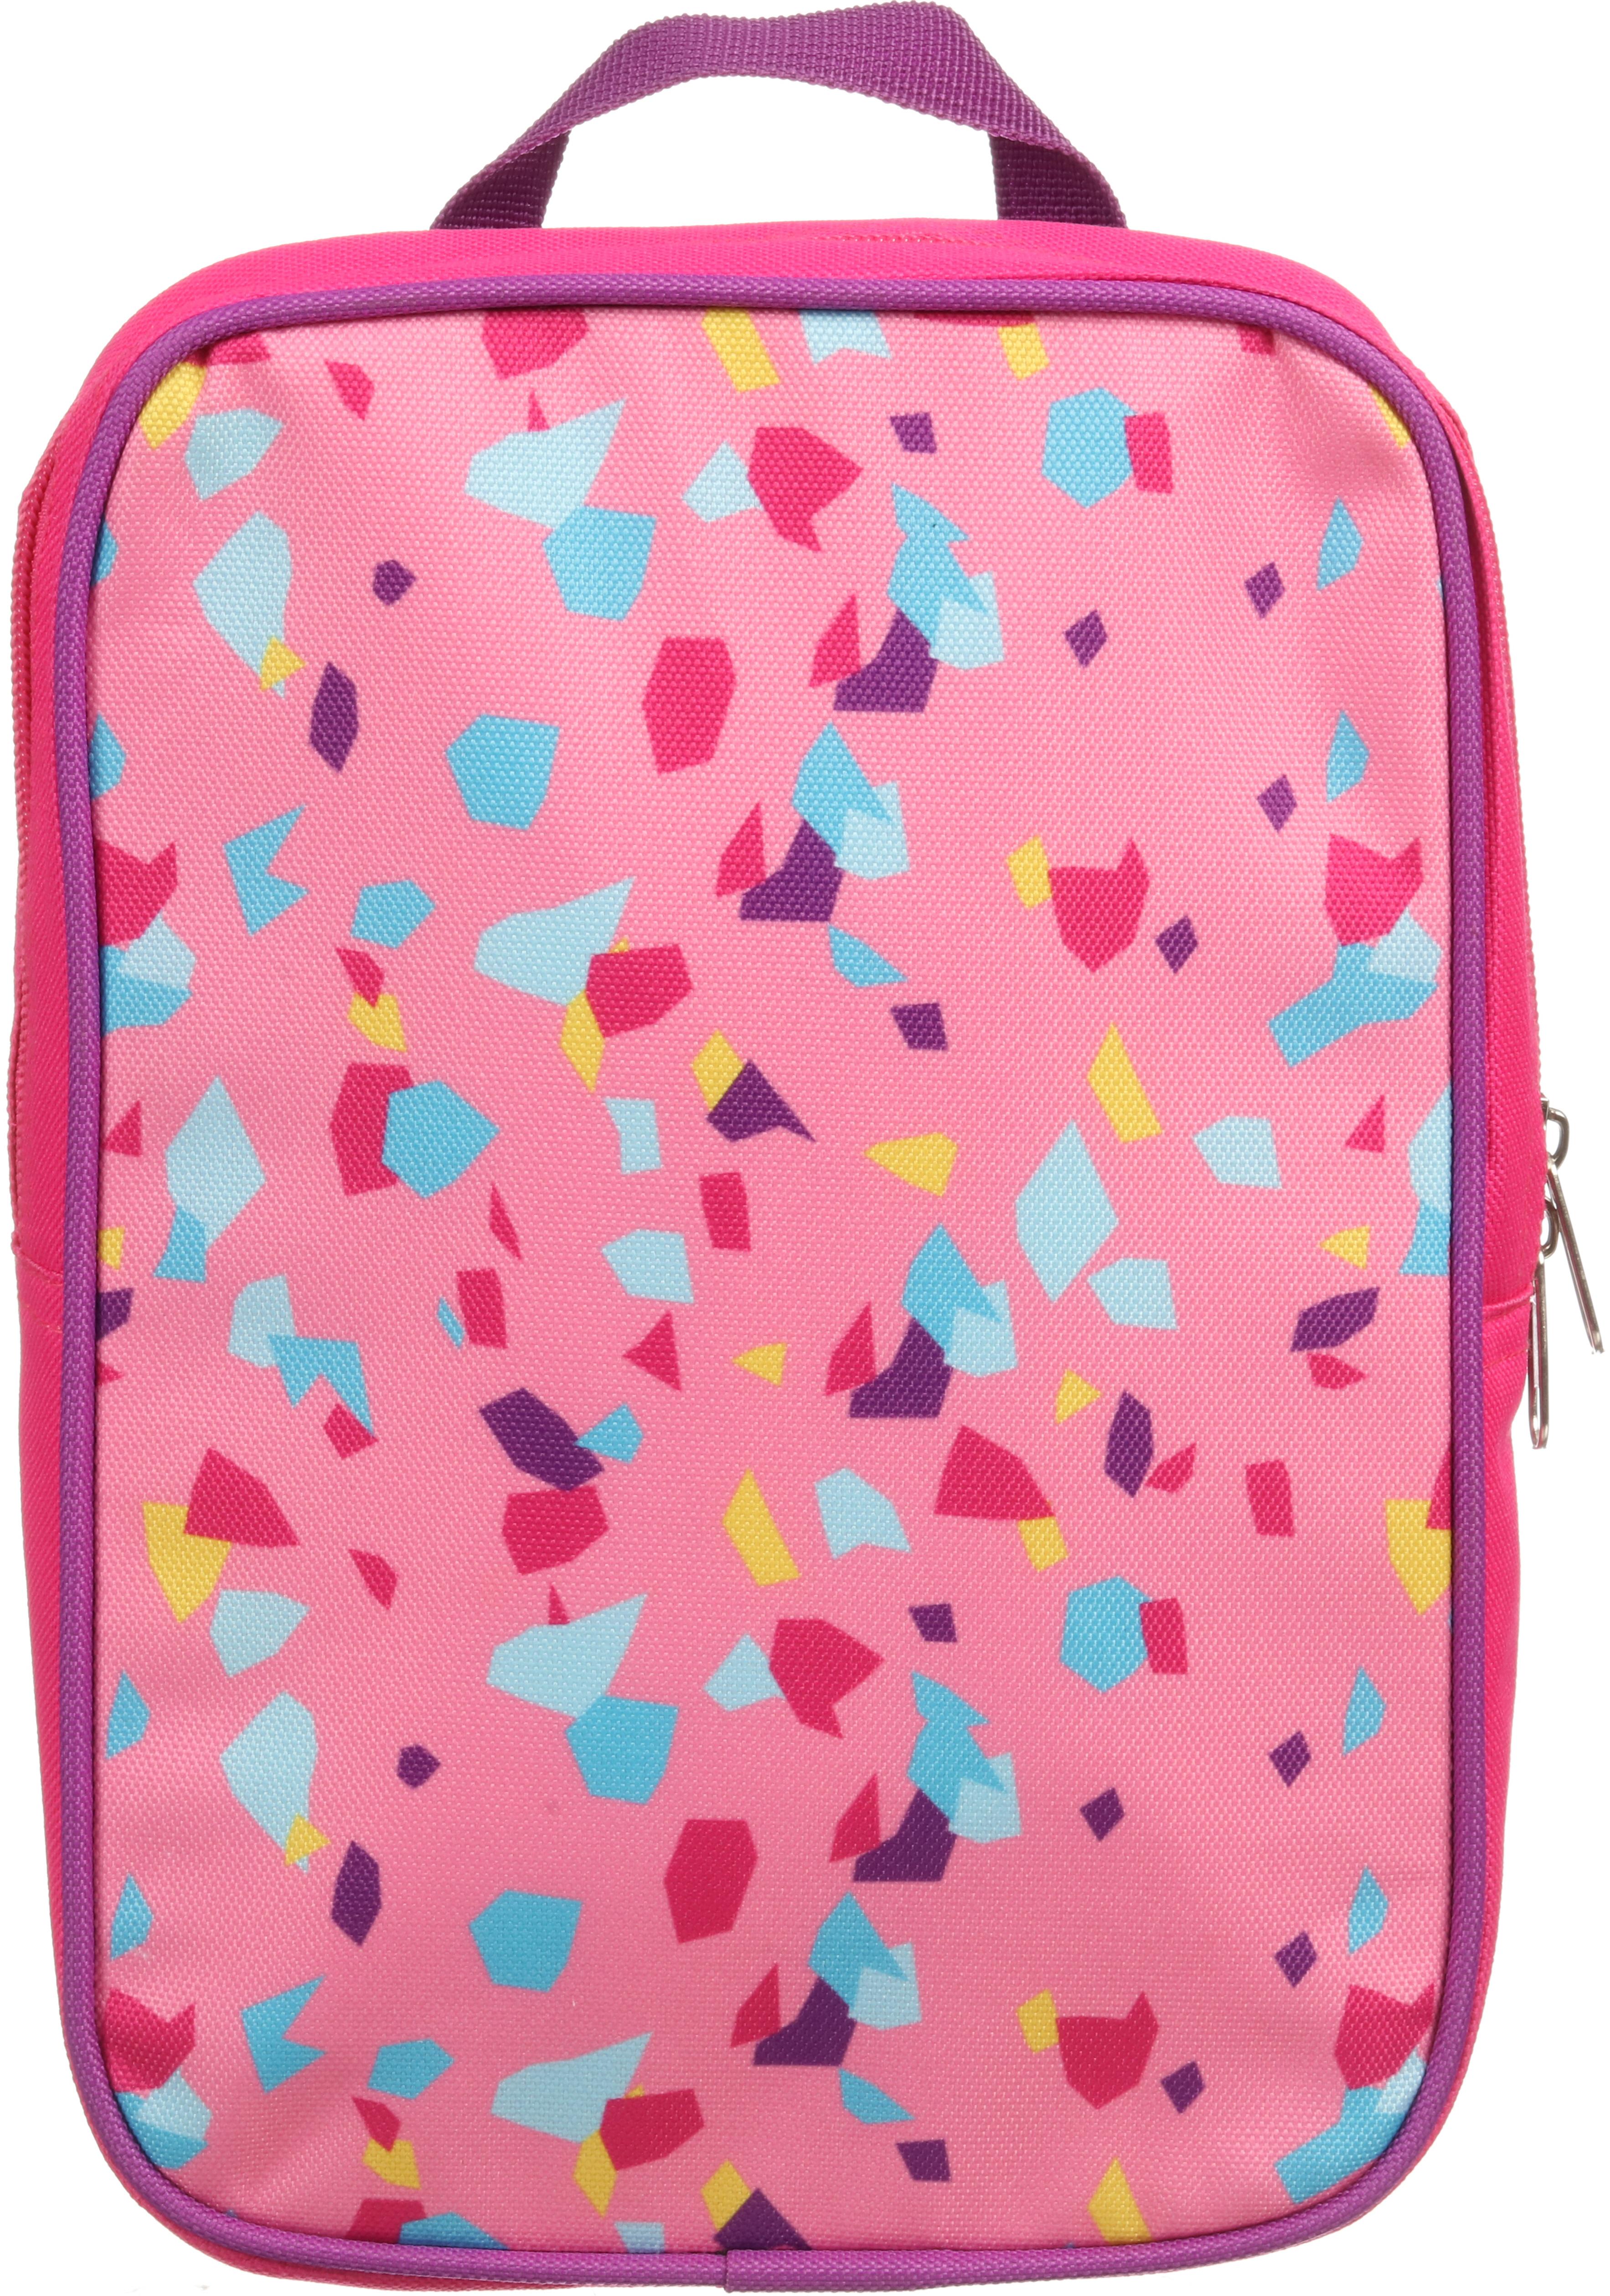 Halfords Insulated Lunch Bag Pink Terrazzo